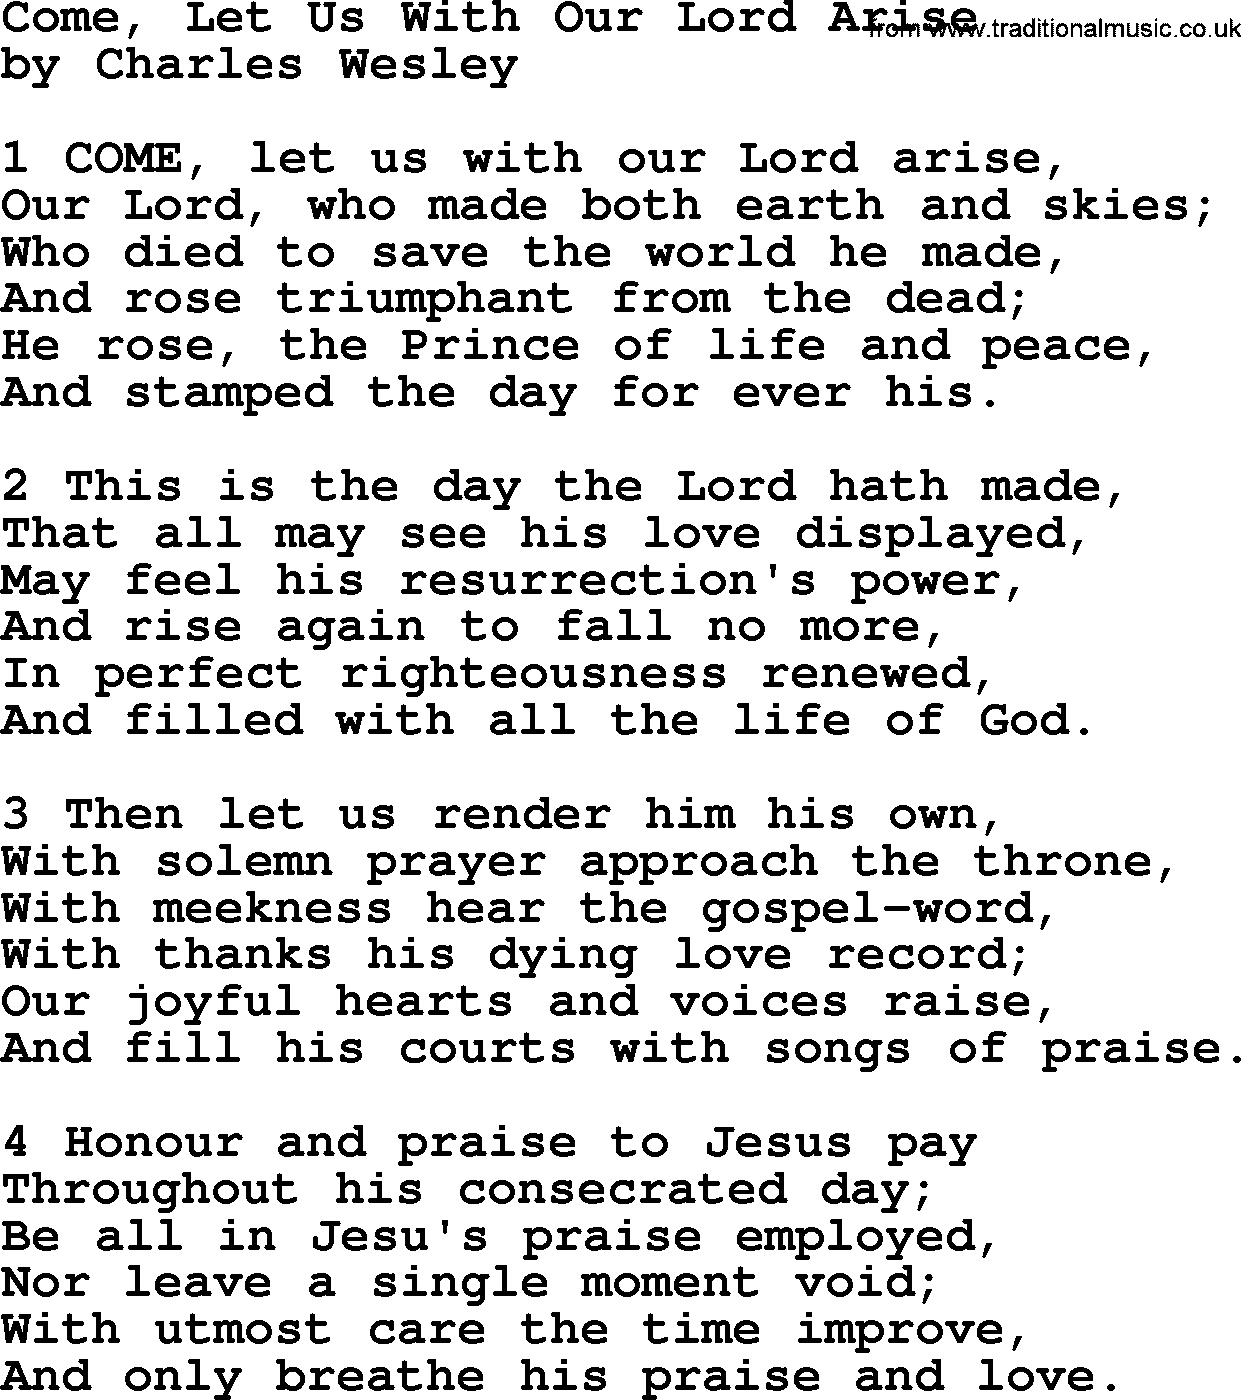 Charles Wesley hymn: Come, Let Us With Our Lord Arise, lyrics